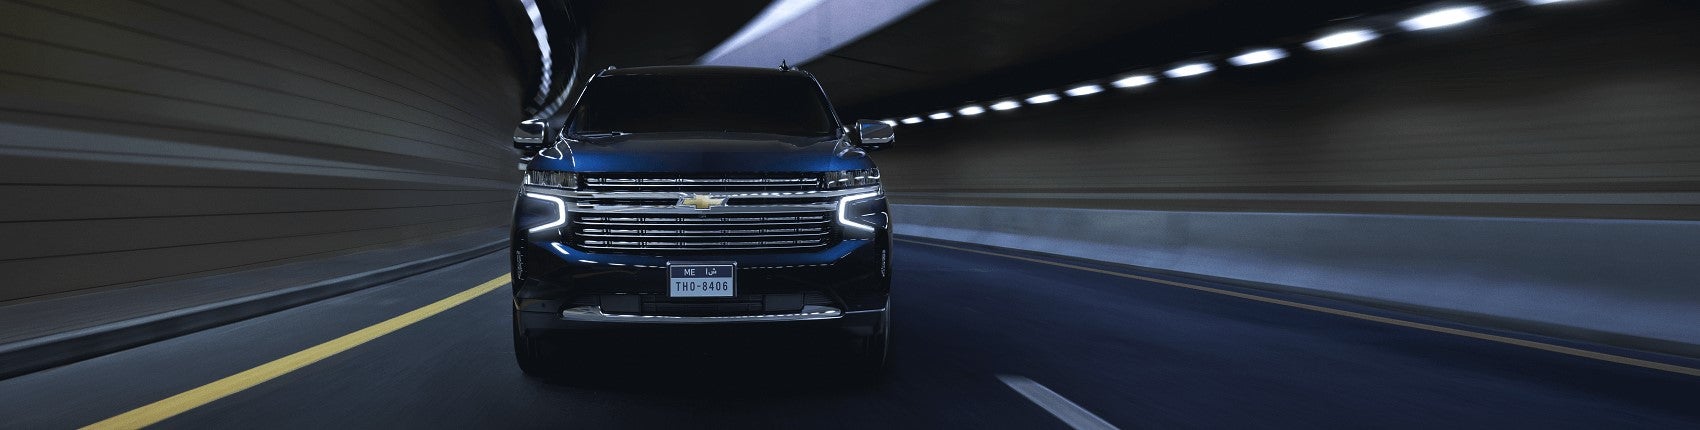 2021 Chevy Tahoe Review New Hudson MI